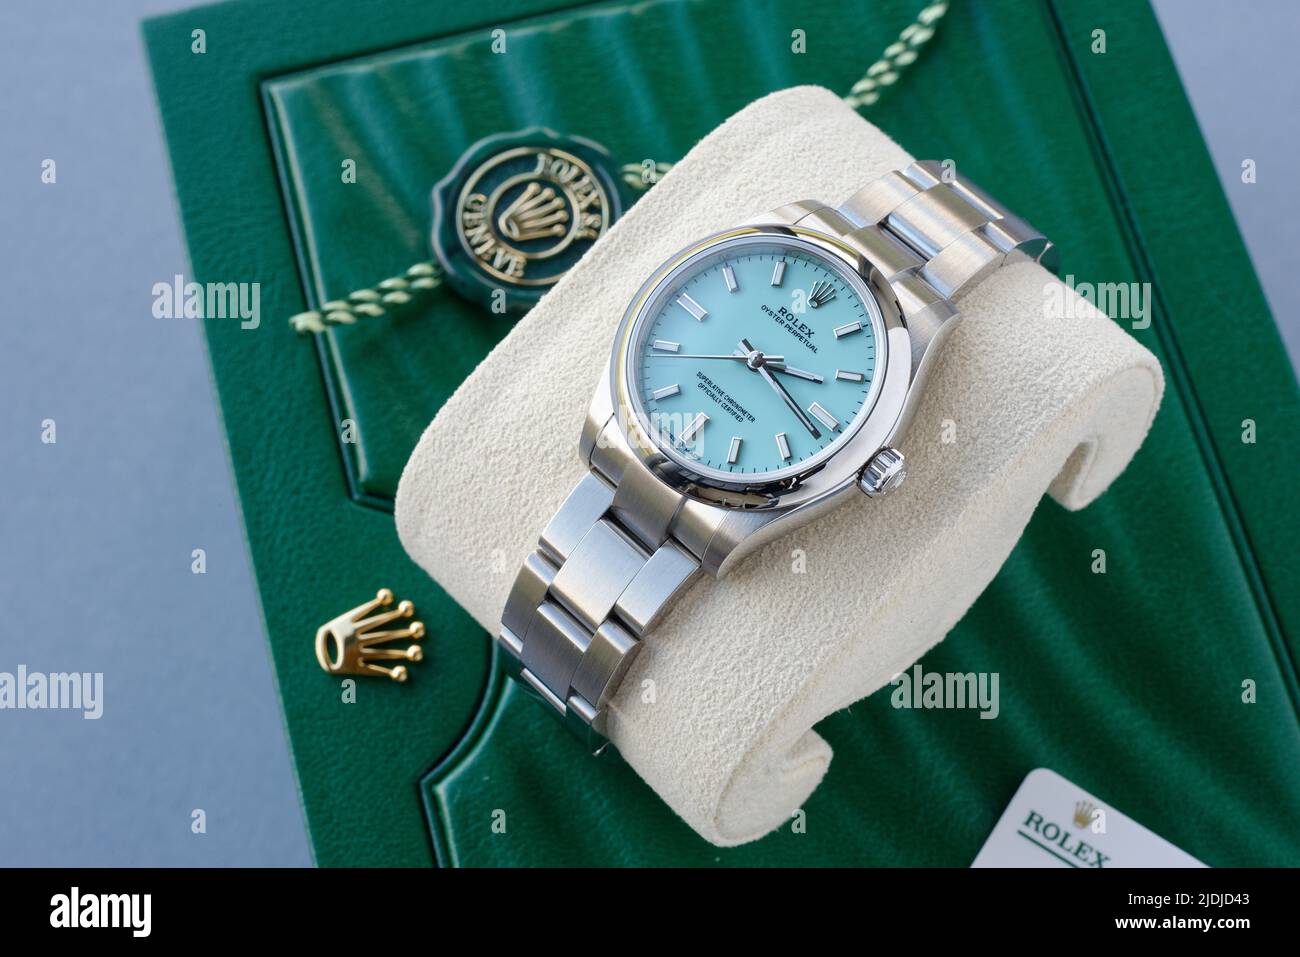 Rolex Oyster Perpetual, superlative chronometer officially certified. Tiffany Turquoise Blue face. Stock Photo